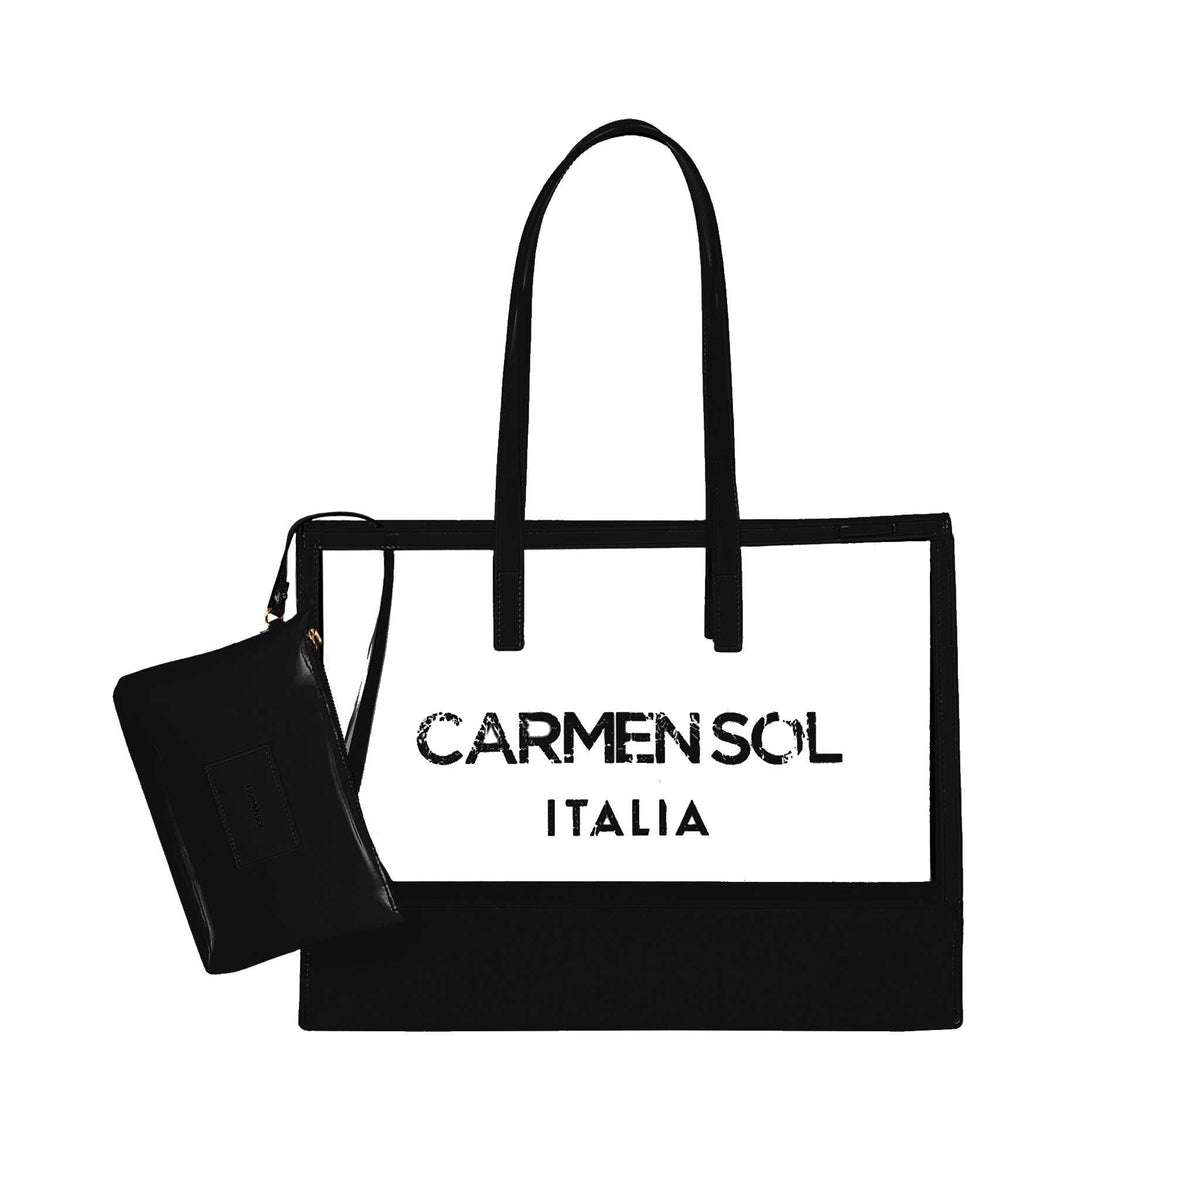 Taormina beach bags for women in color black with detachable bags